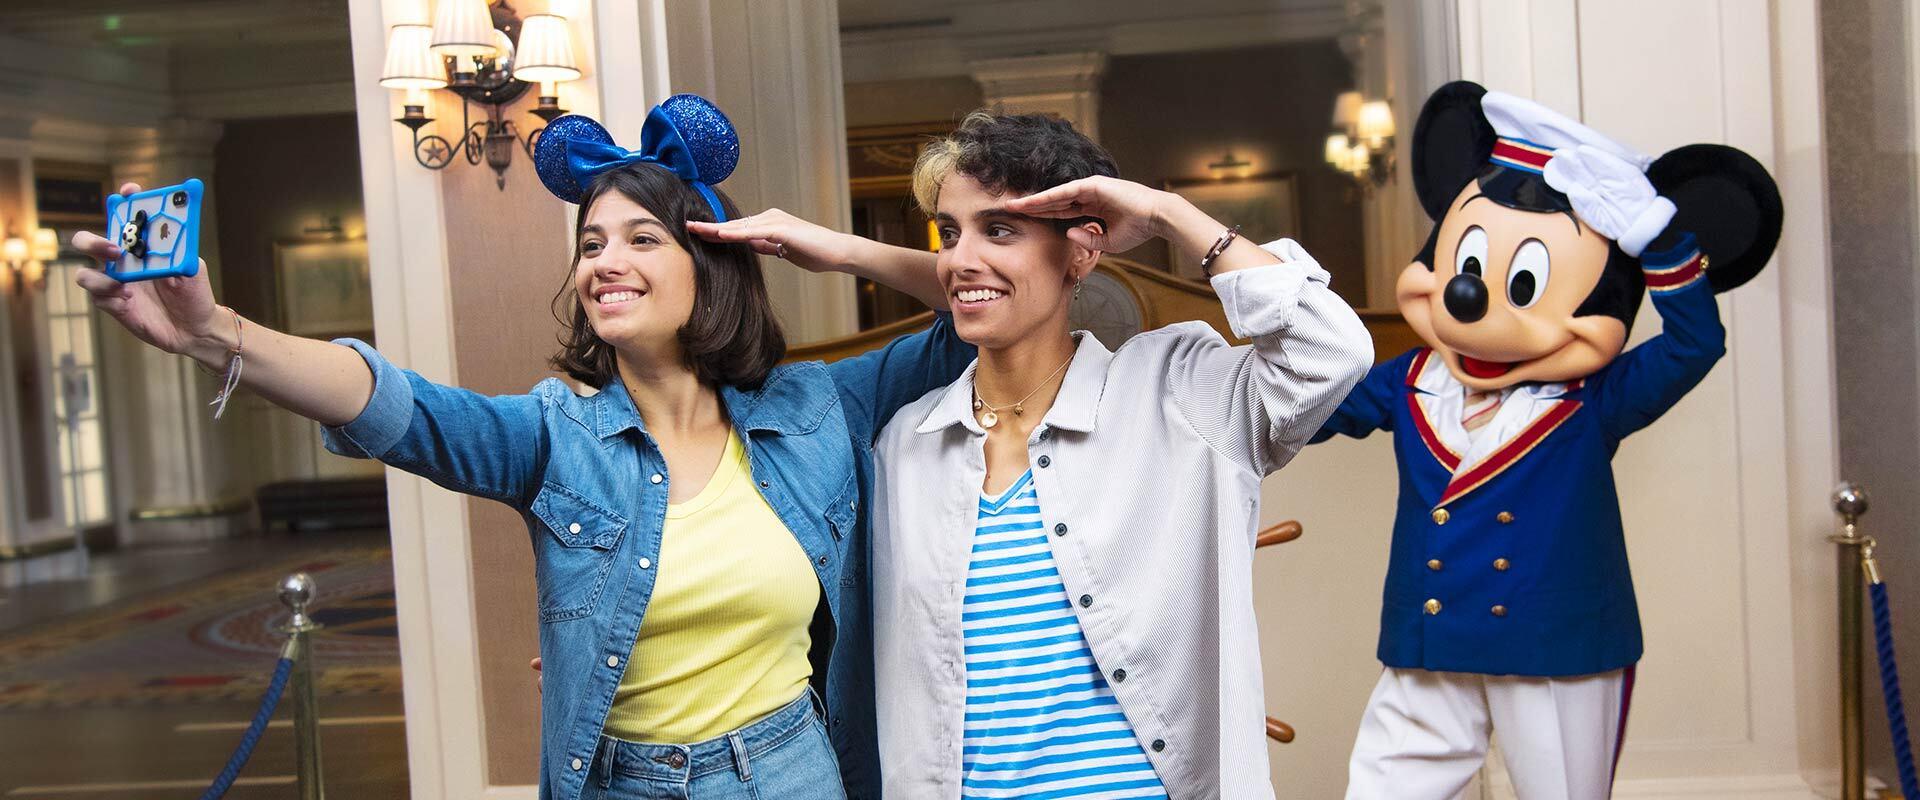 Share an unforgettable moment with Disney Characters